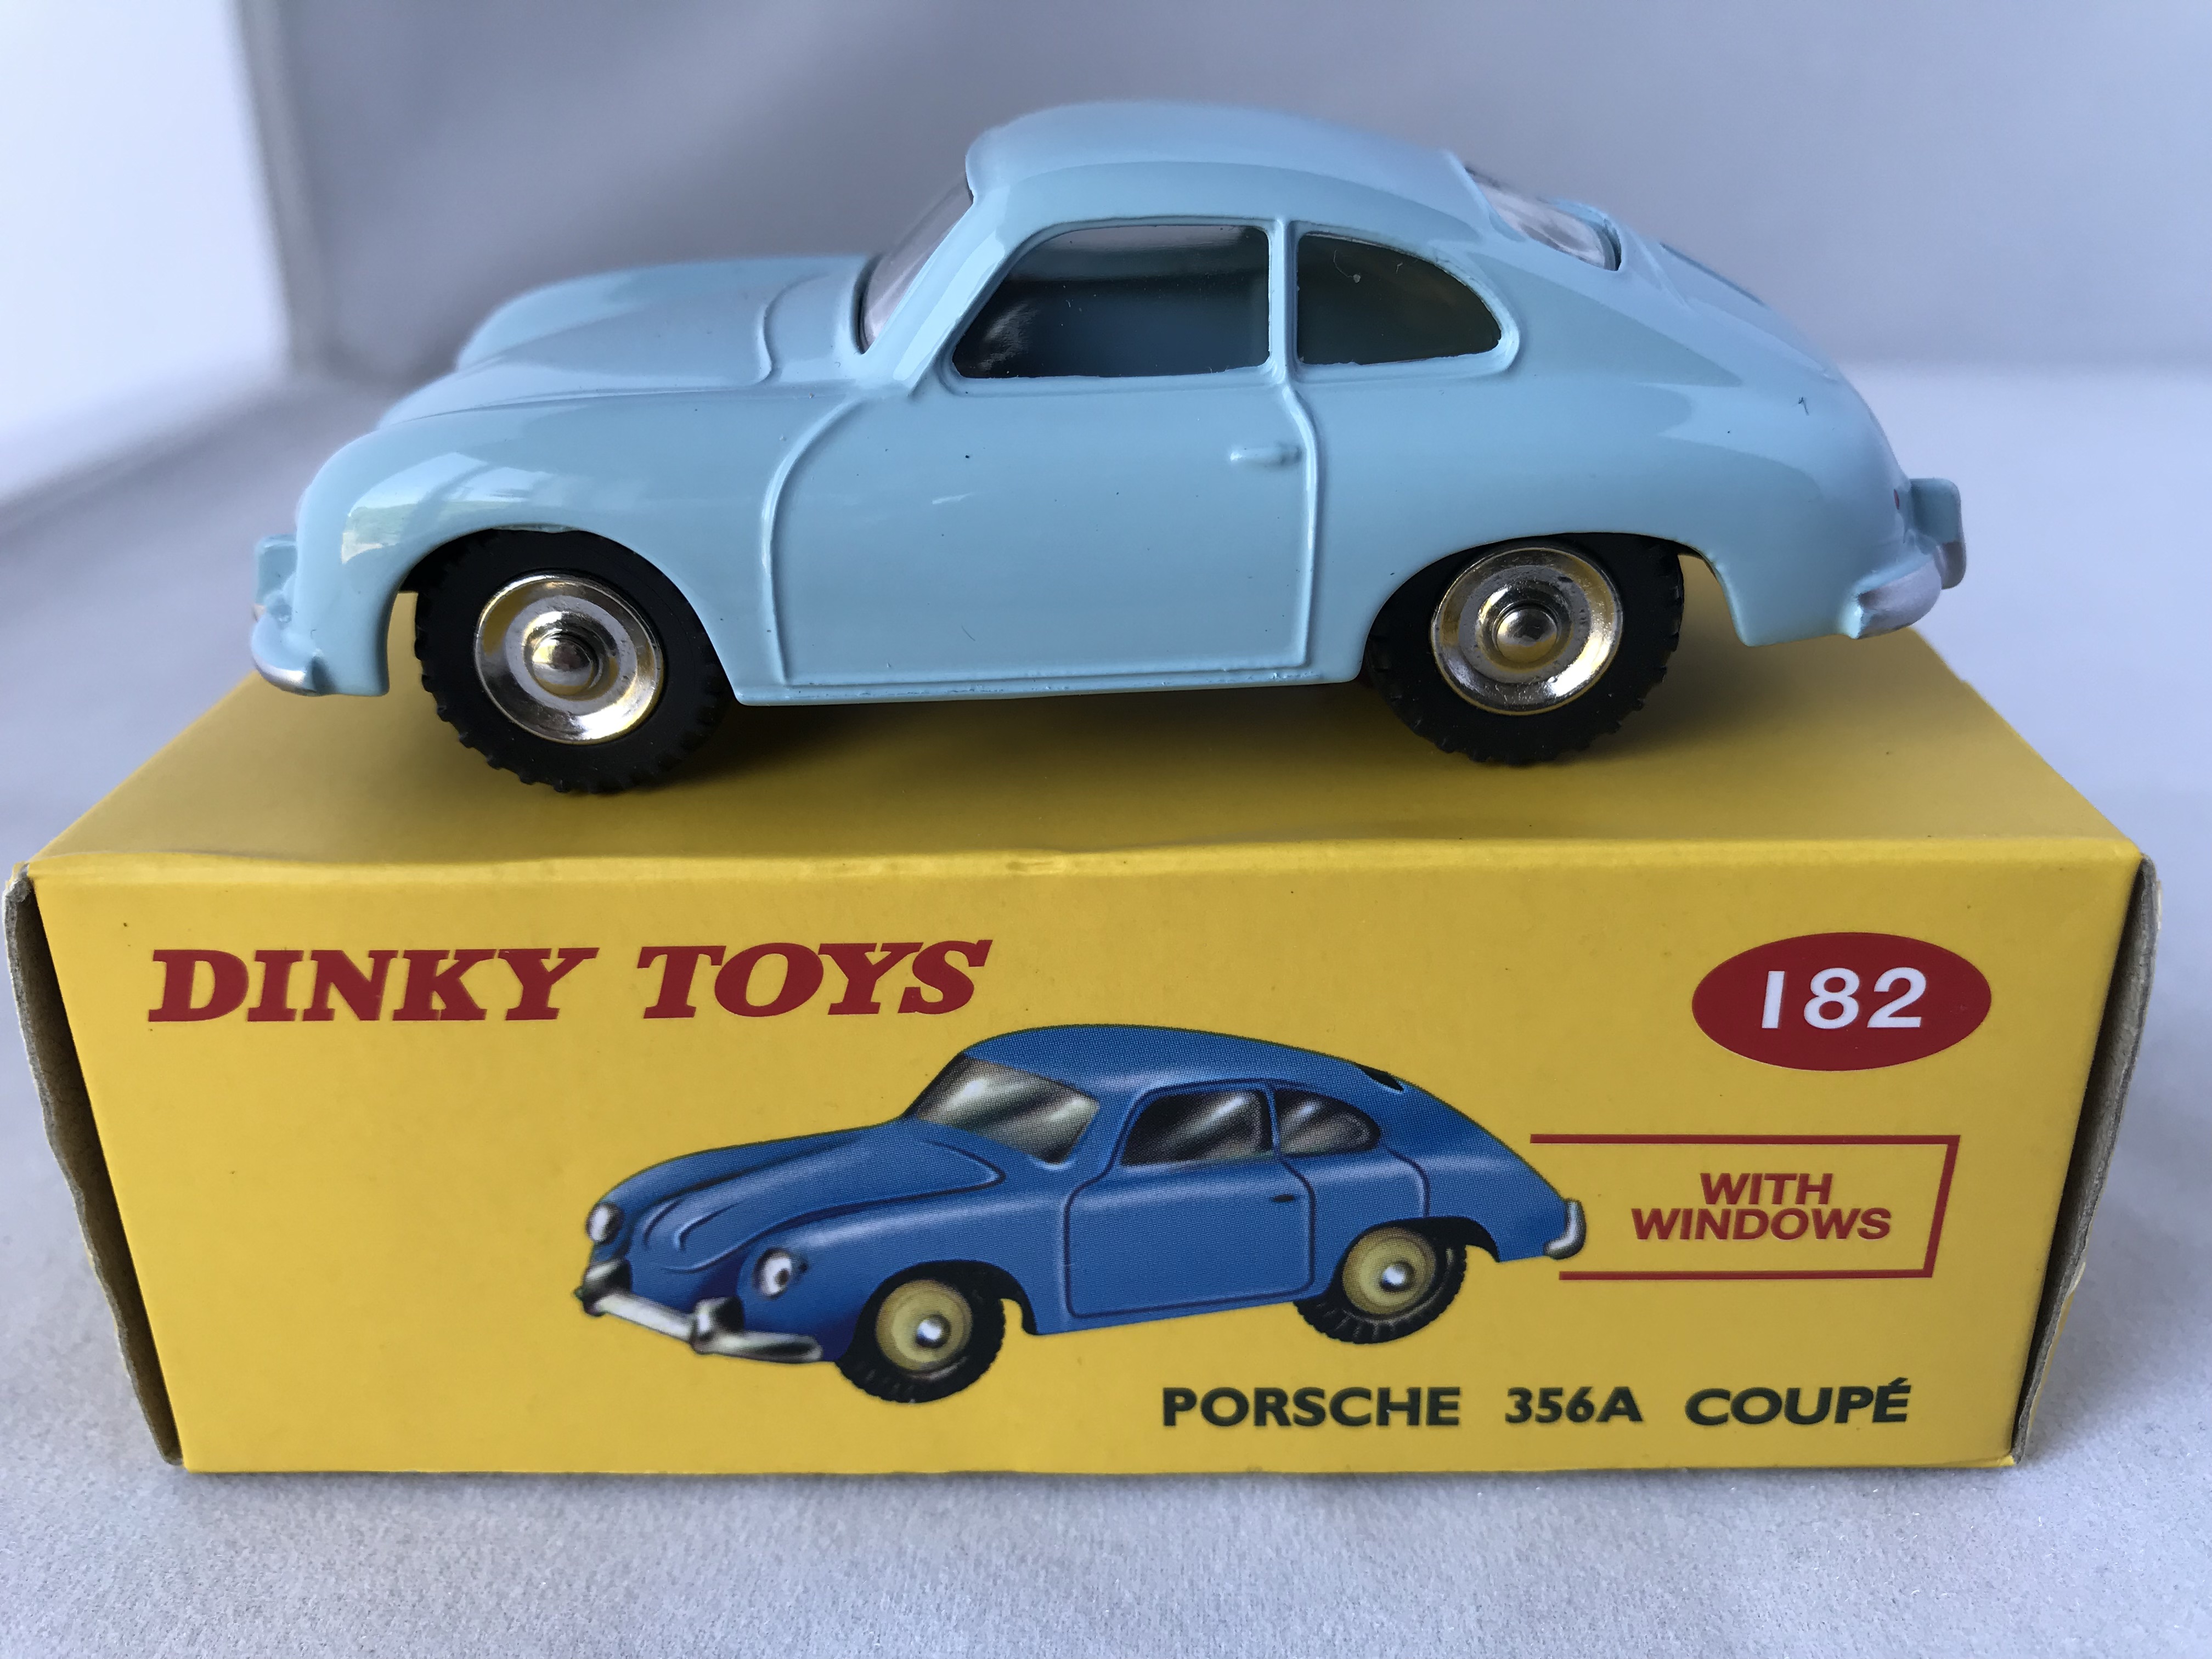 DeAgostini 1//43 Dinky Toys 182 Porsche 356a Coupe Pink DIECAST models Car